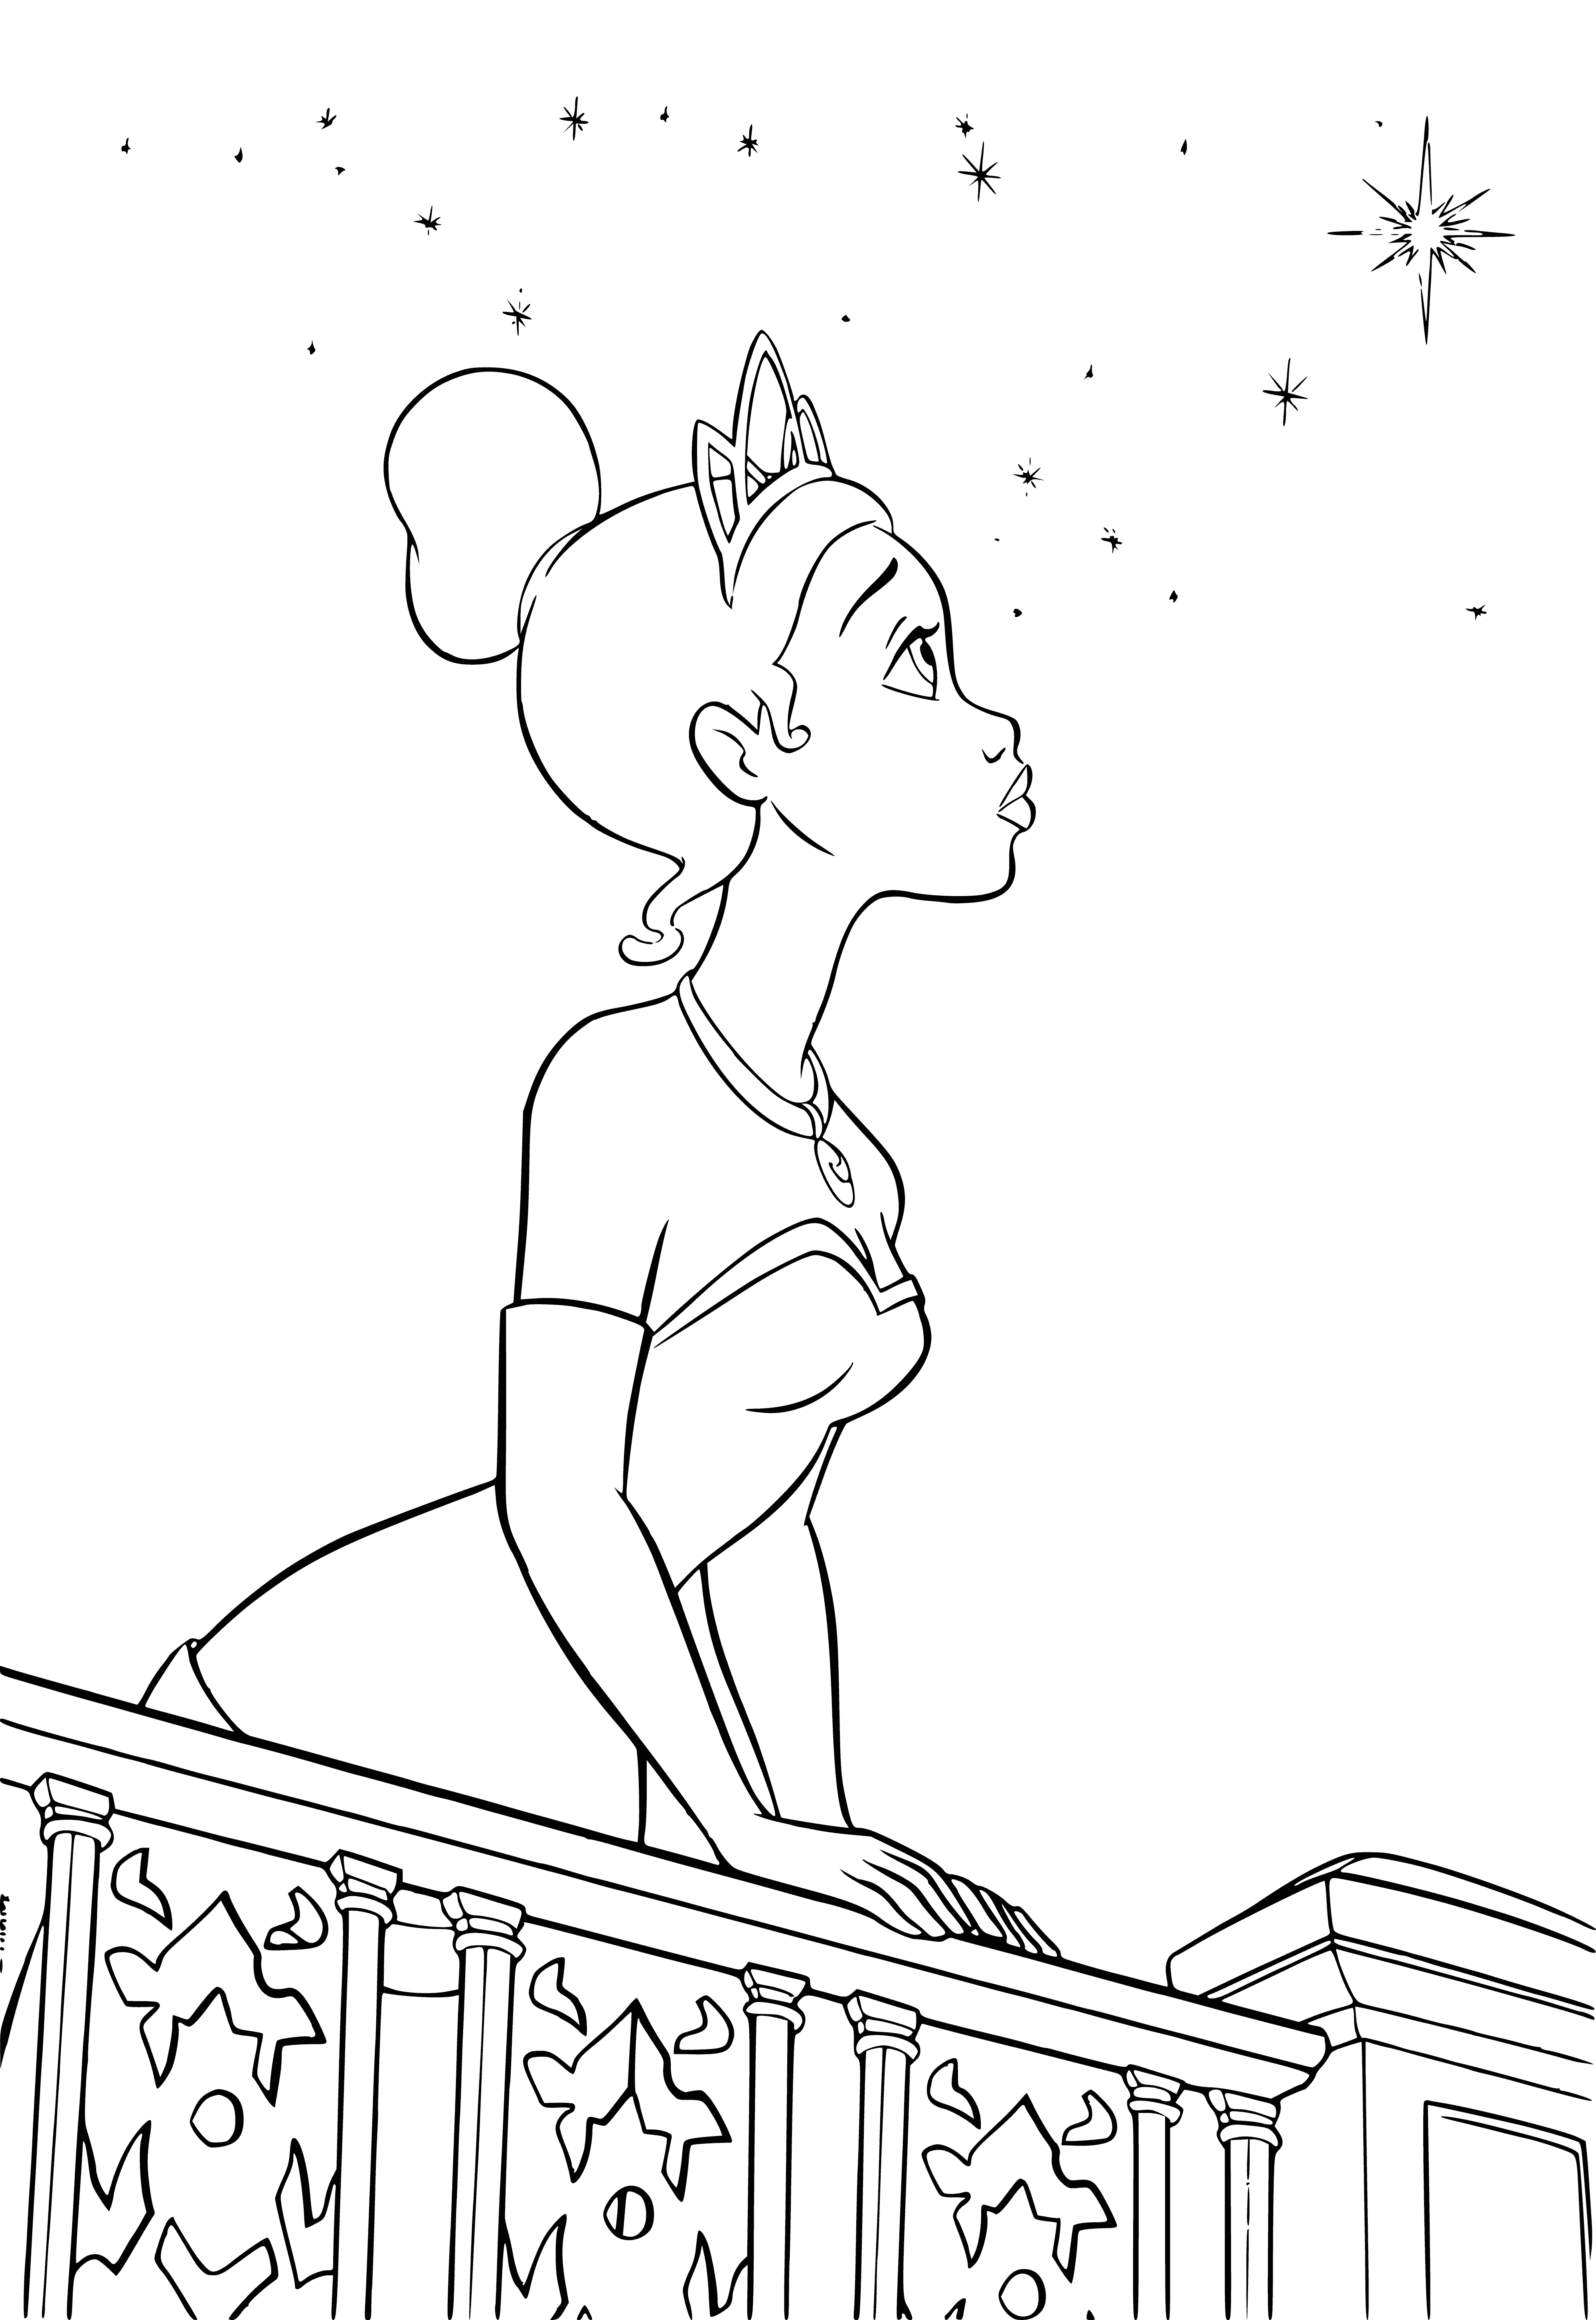 coloring page: Tiana holds a small frog and is ready to make a wish in a dark room.